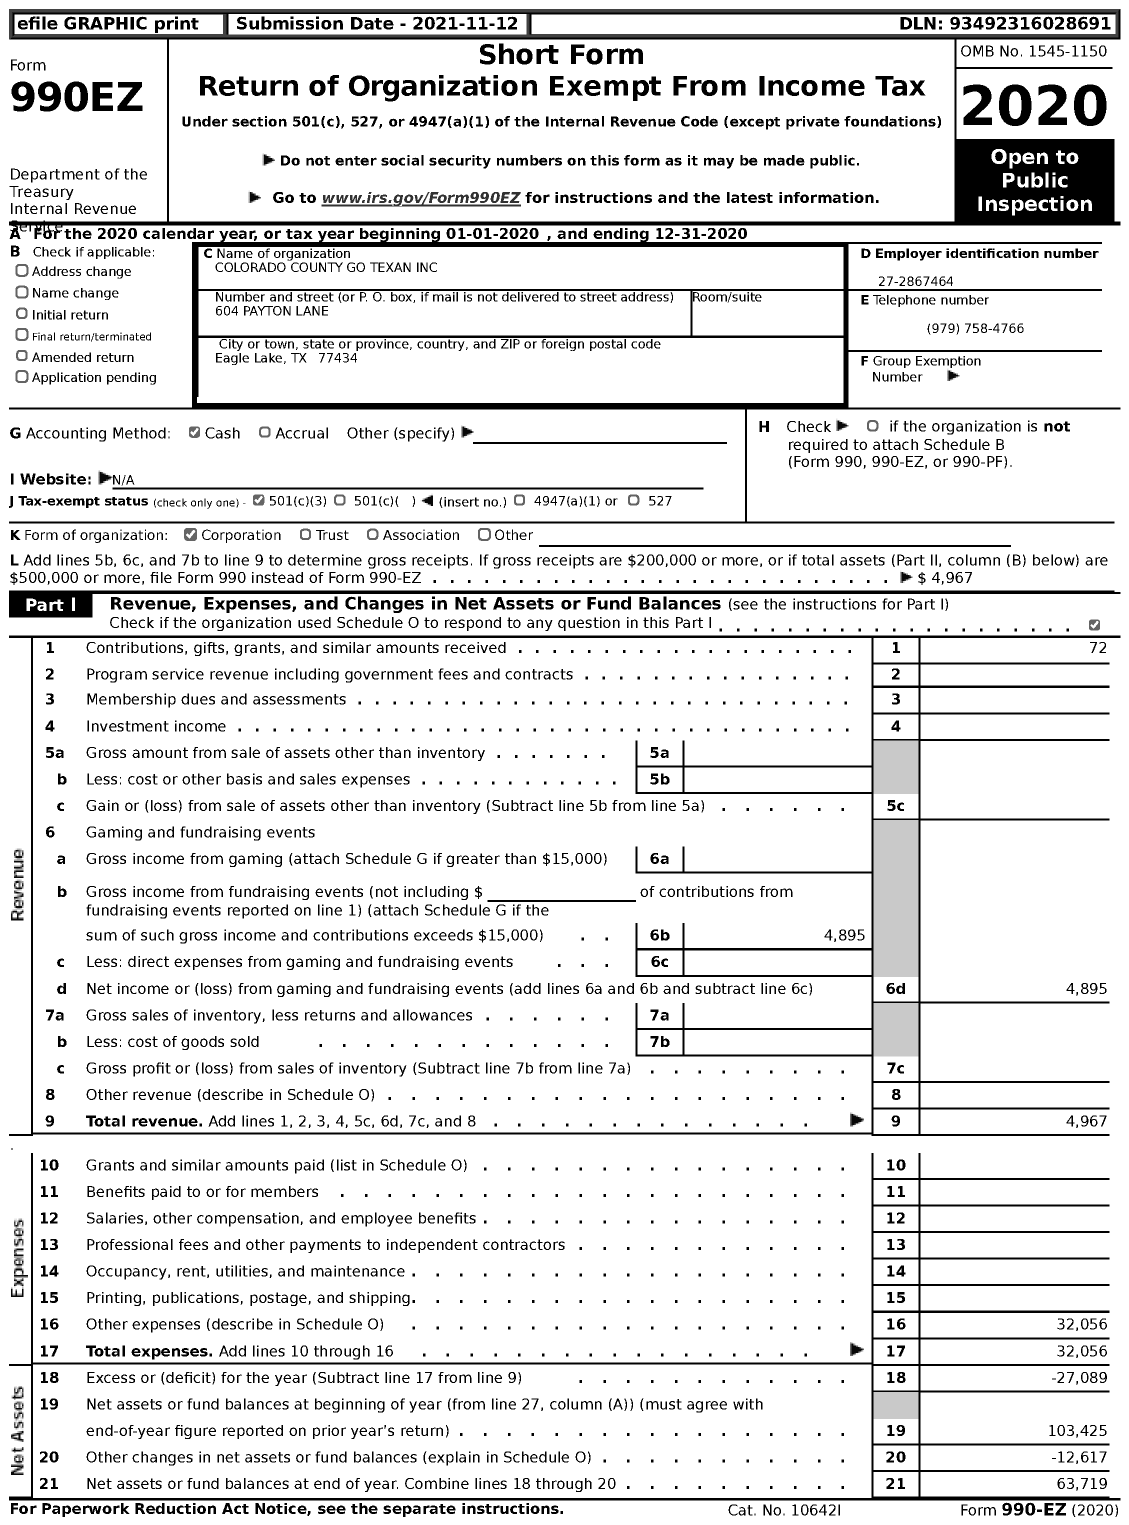 Image of first page of 2020 Form 990EZ for Colorado County Go Texan